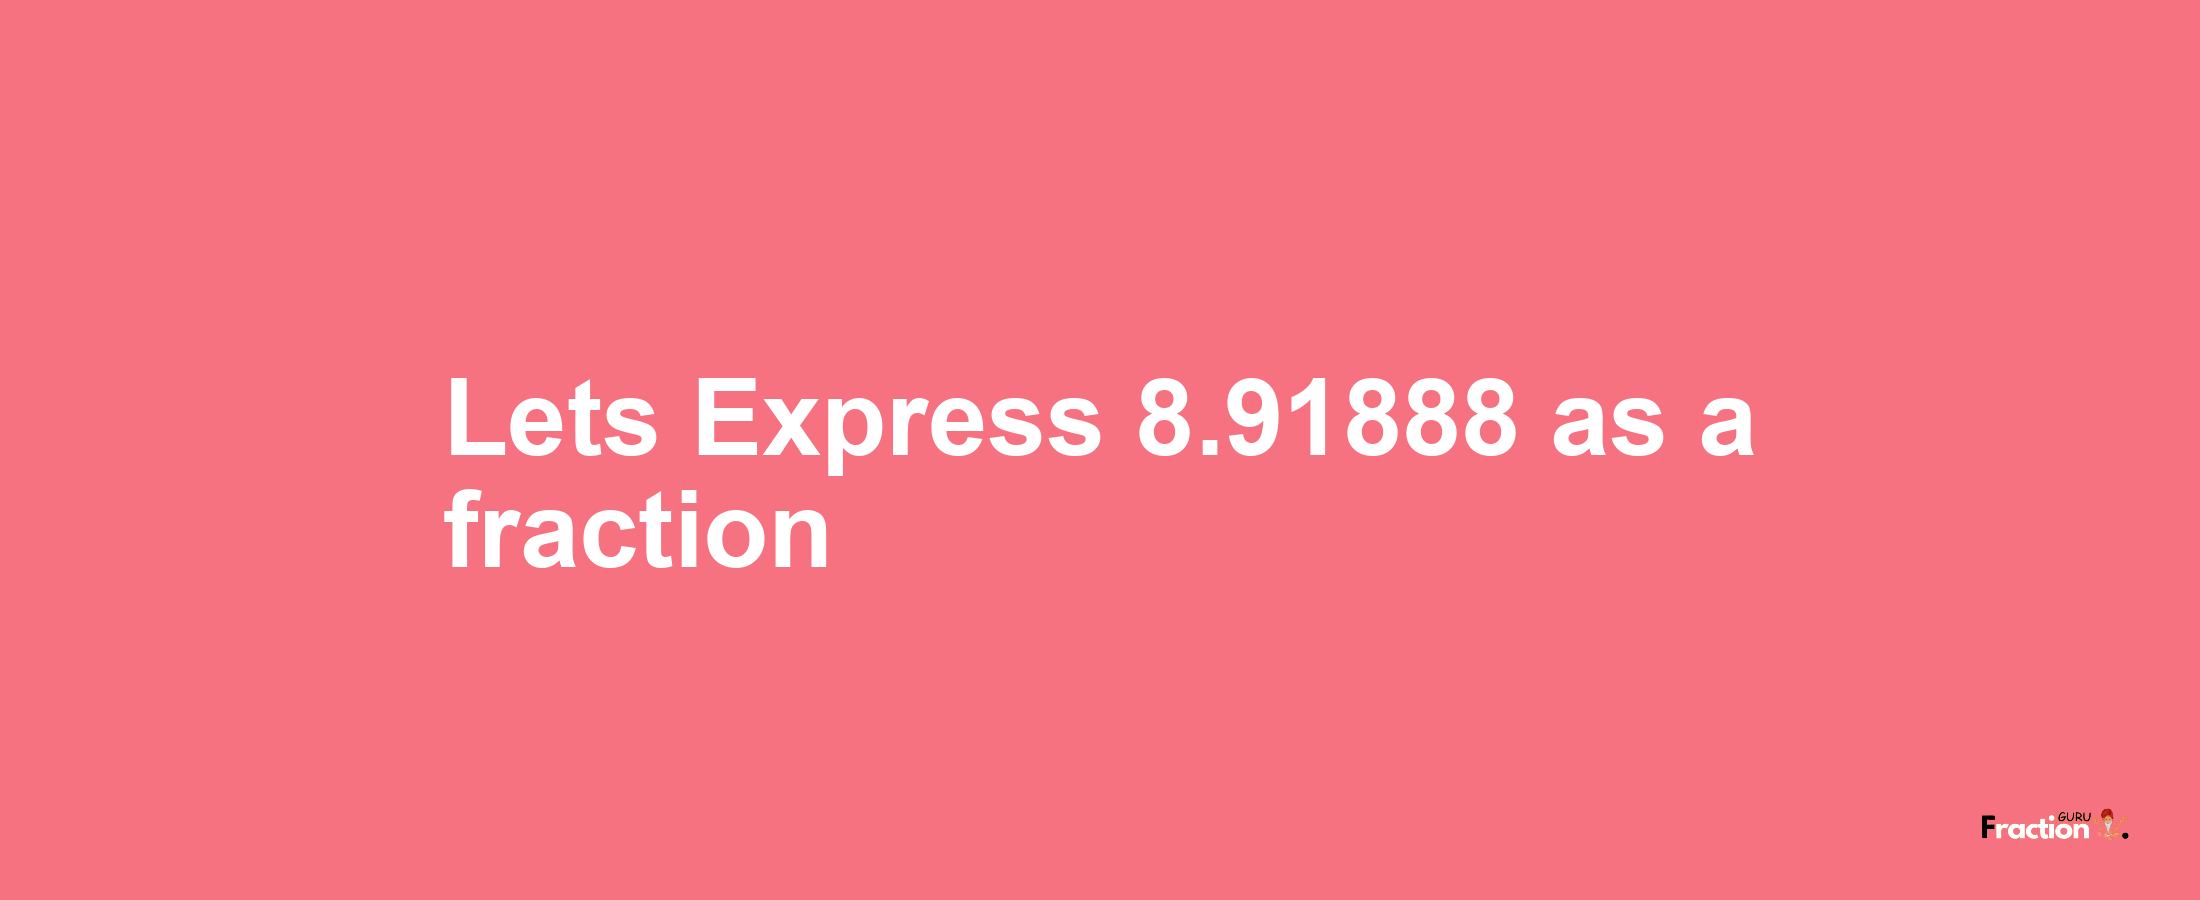 Lets Express 8.91888 as afraction